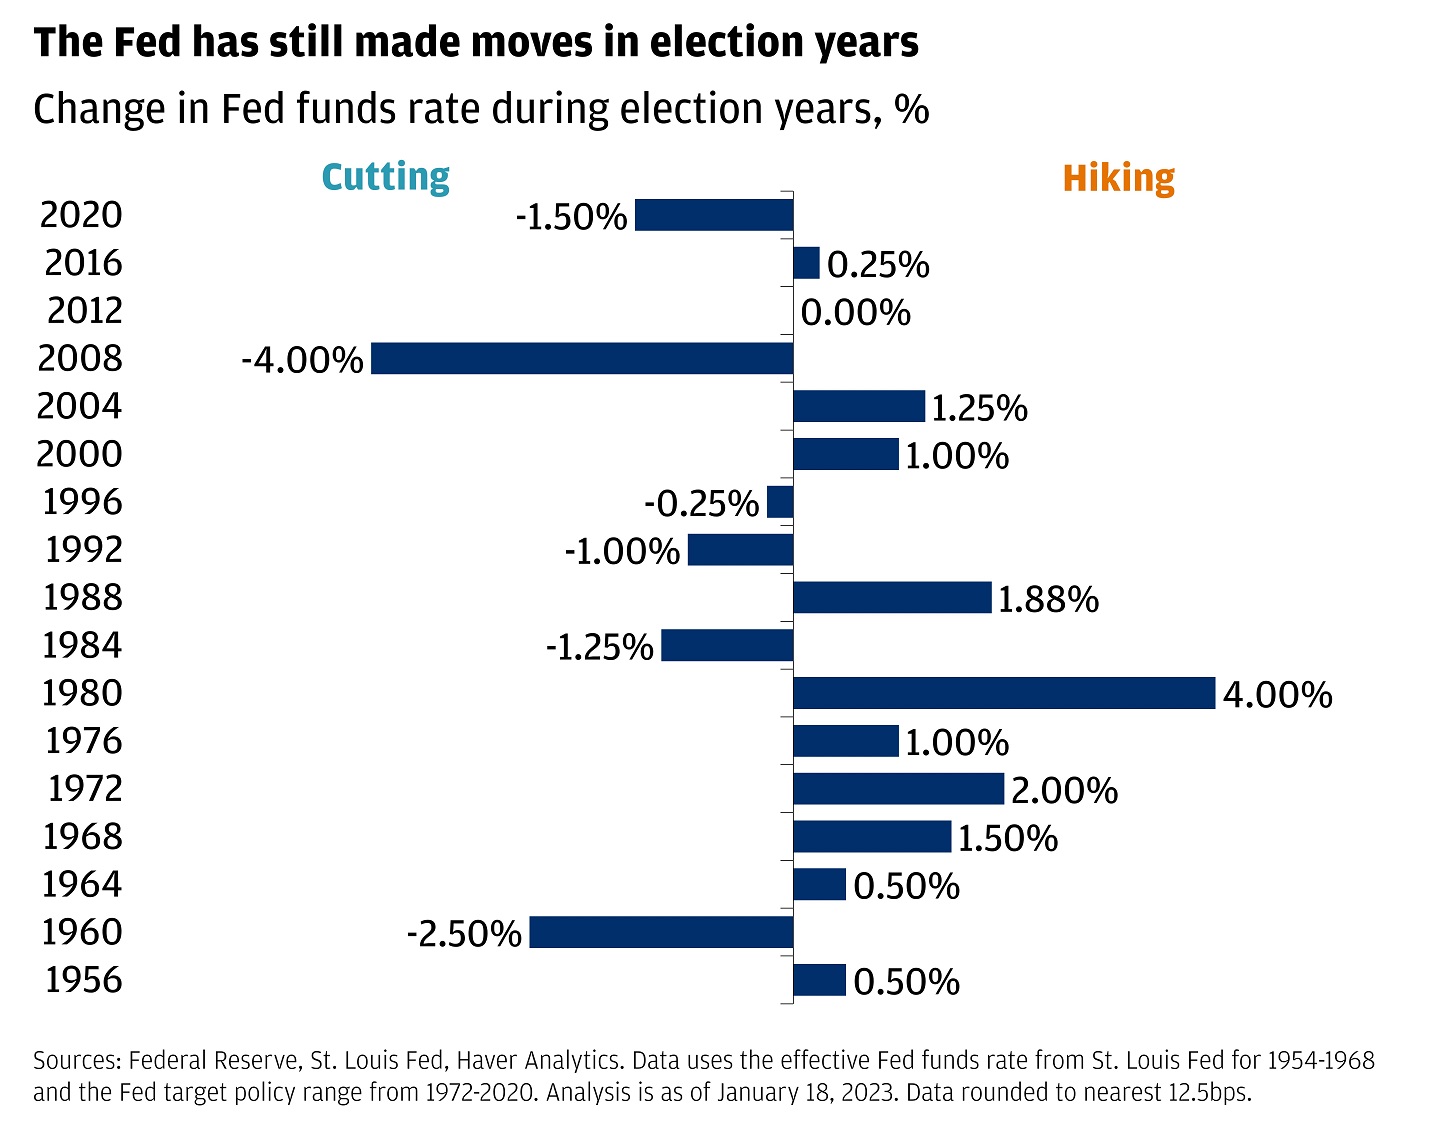 This bar graph shows the change in Fed Funds rate during election years